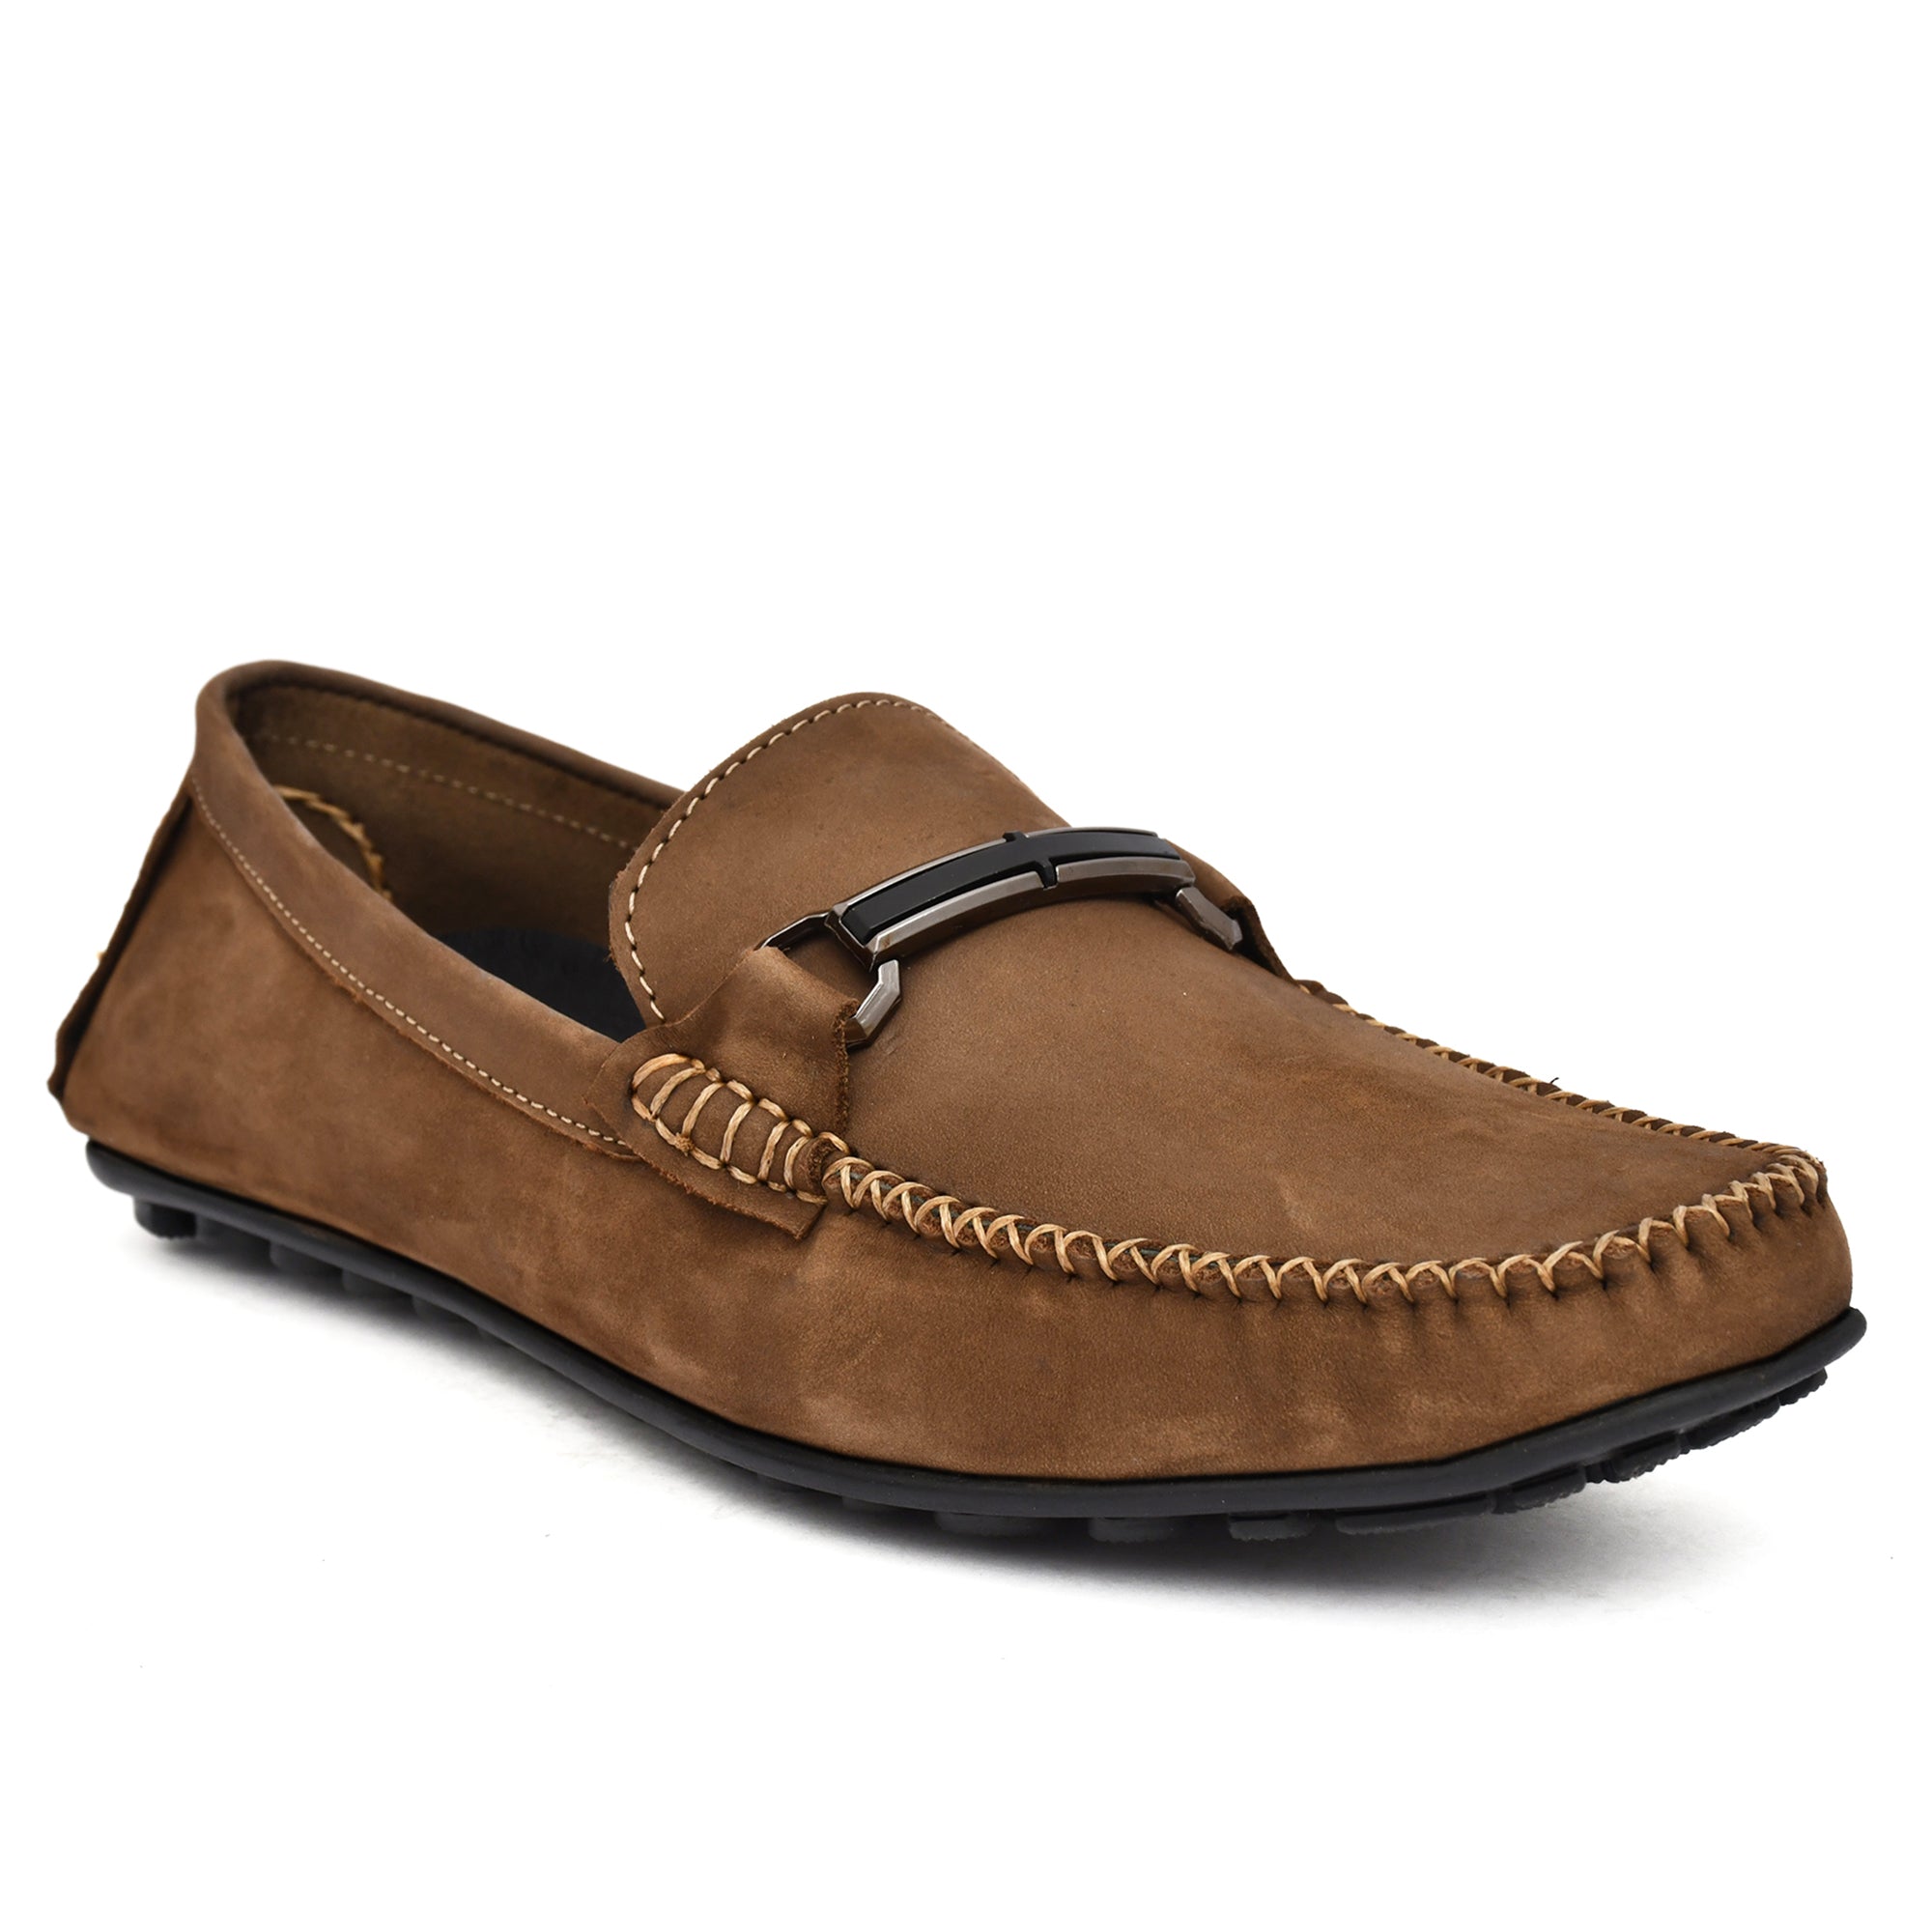 Buckled Loafers for men's countrymaddox